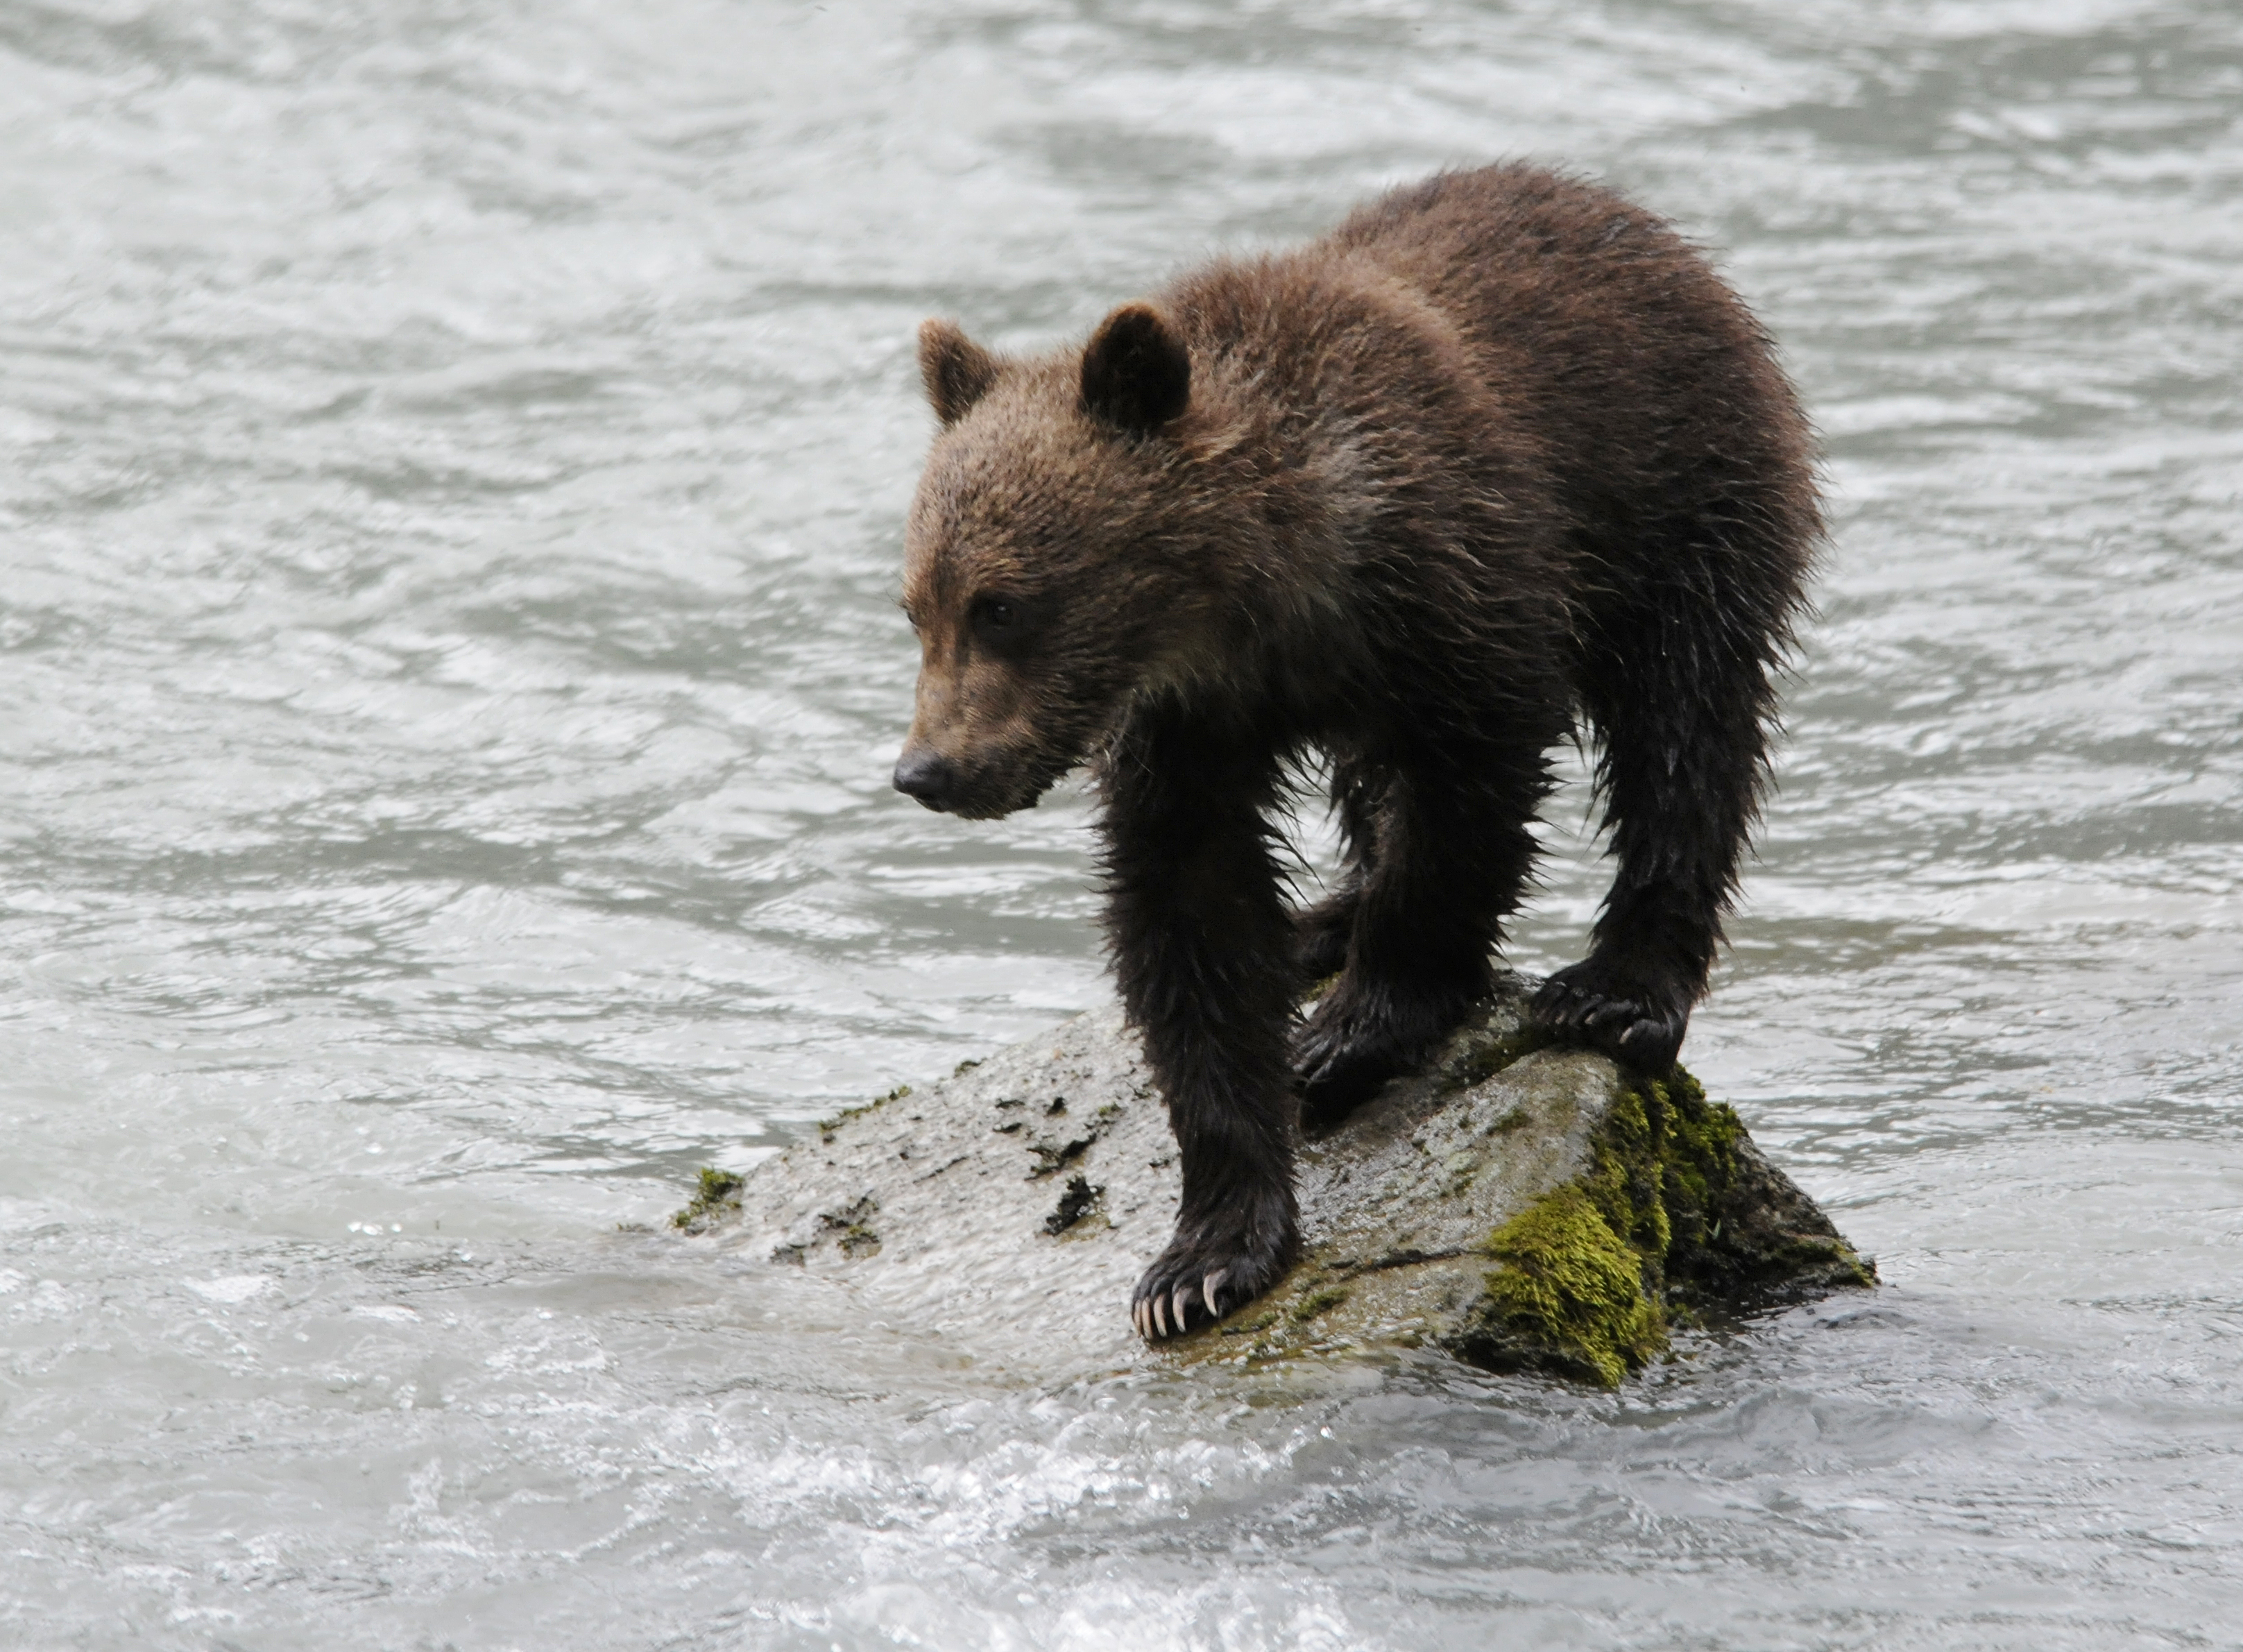 A bear cub in Haines in 2010. (Creative Commons photo by Ray Morris/Flickr)